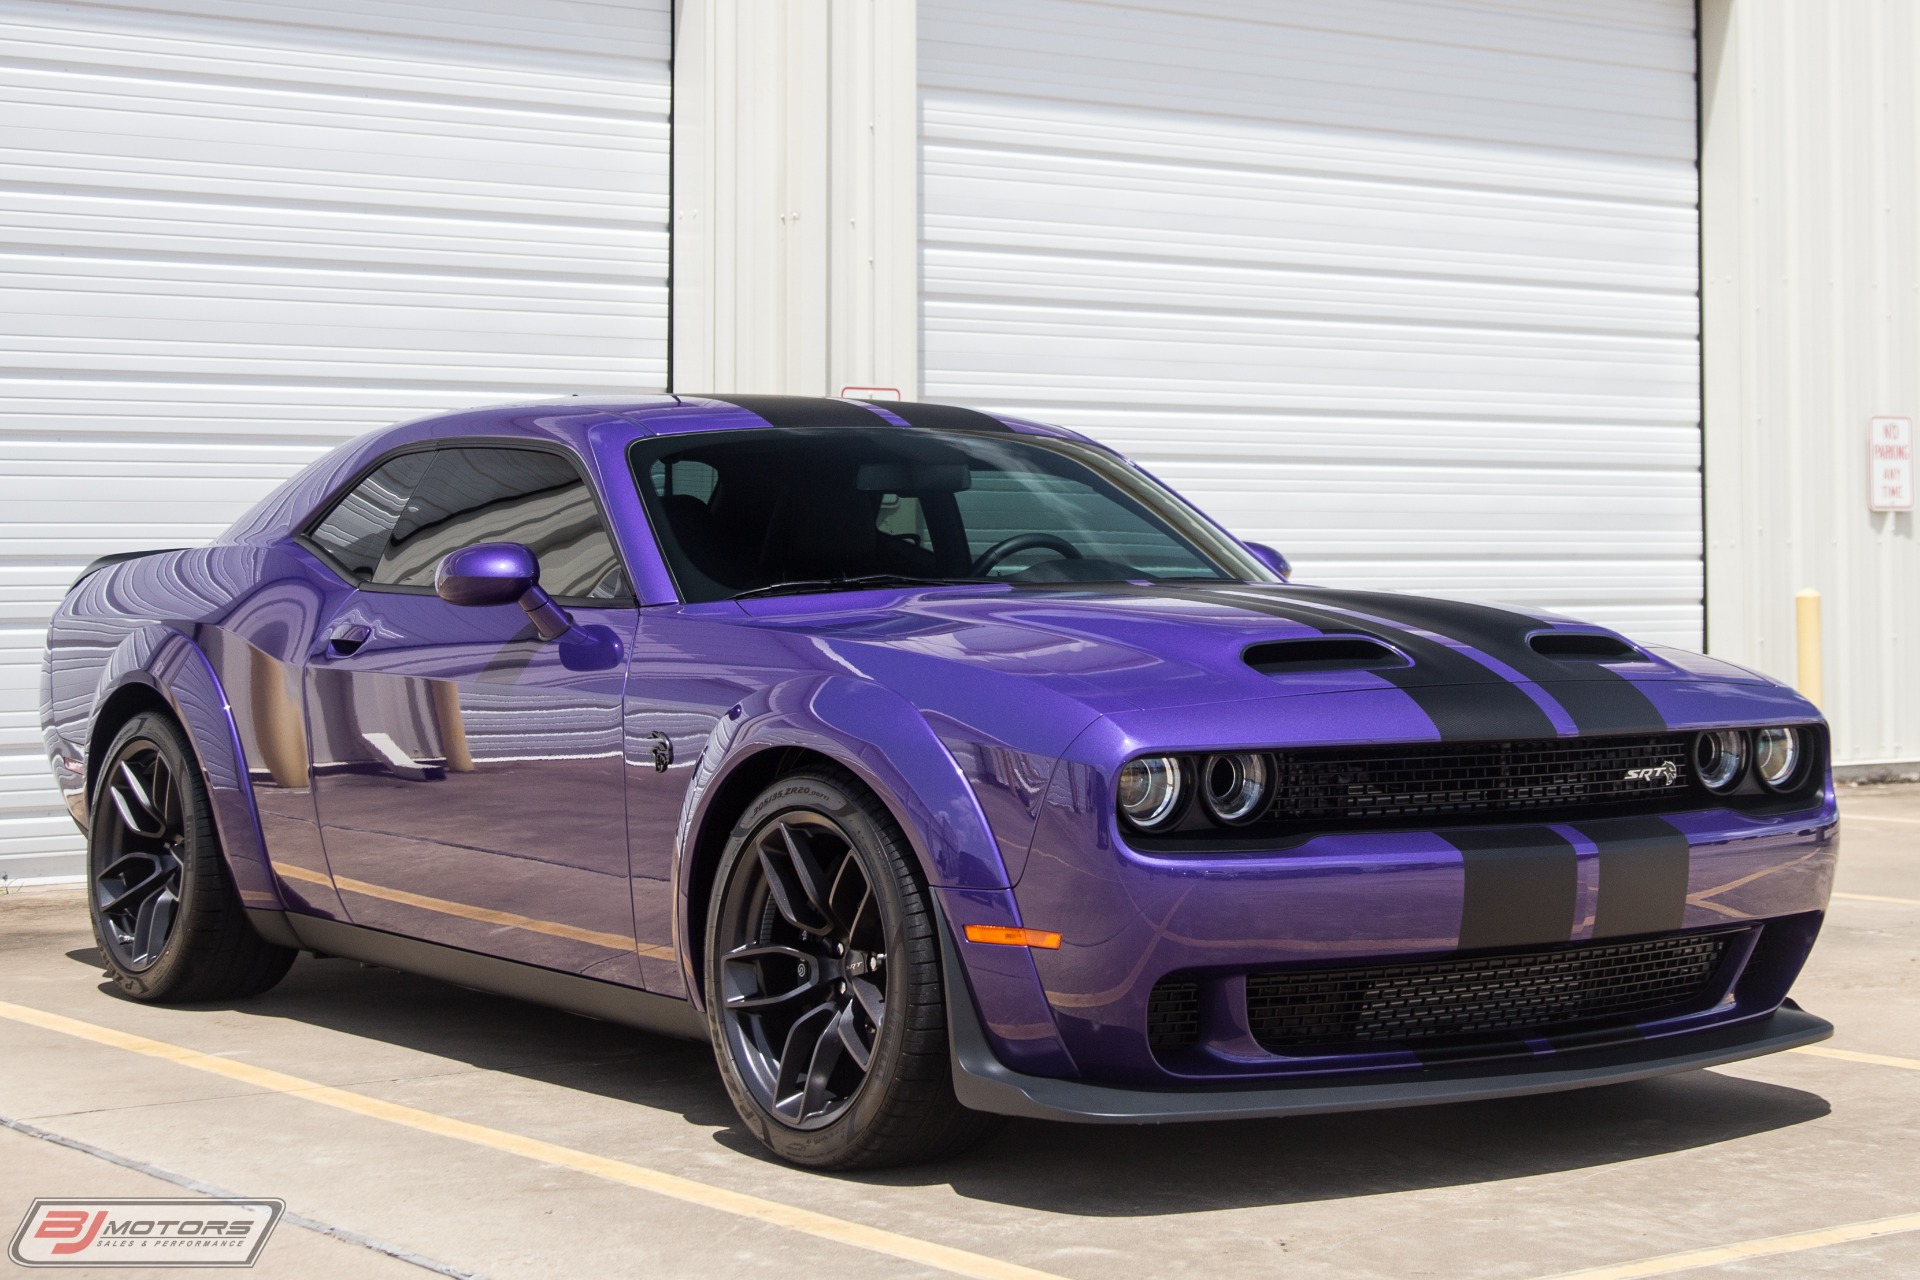 2019 dodge challenger owners manual download